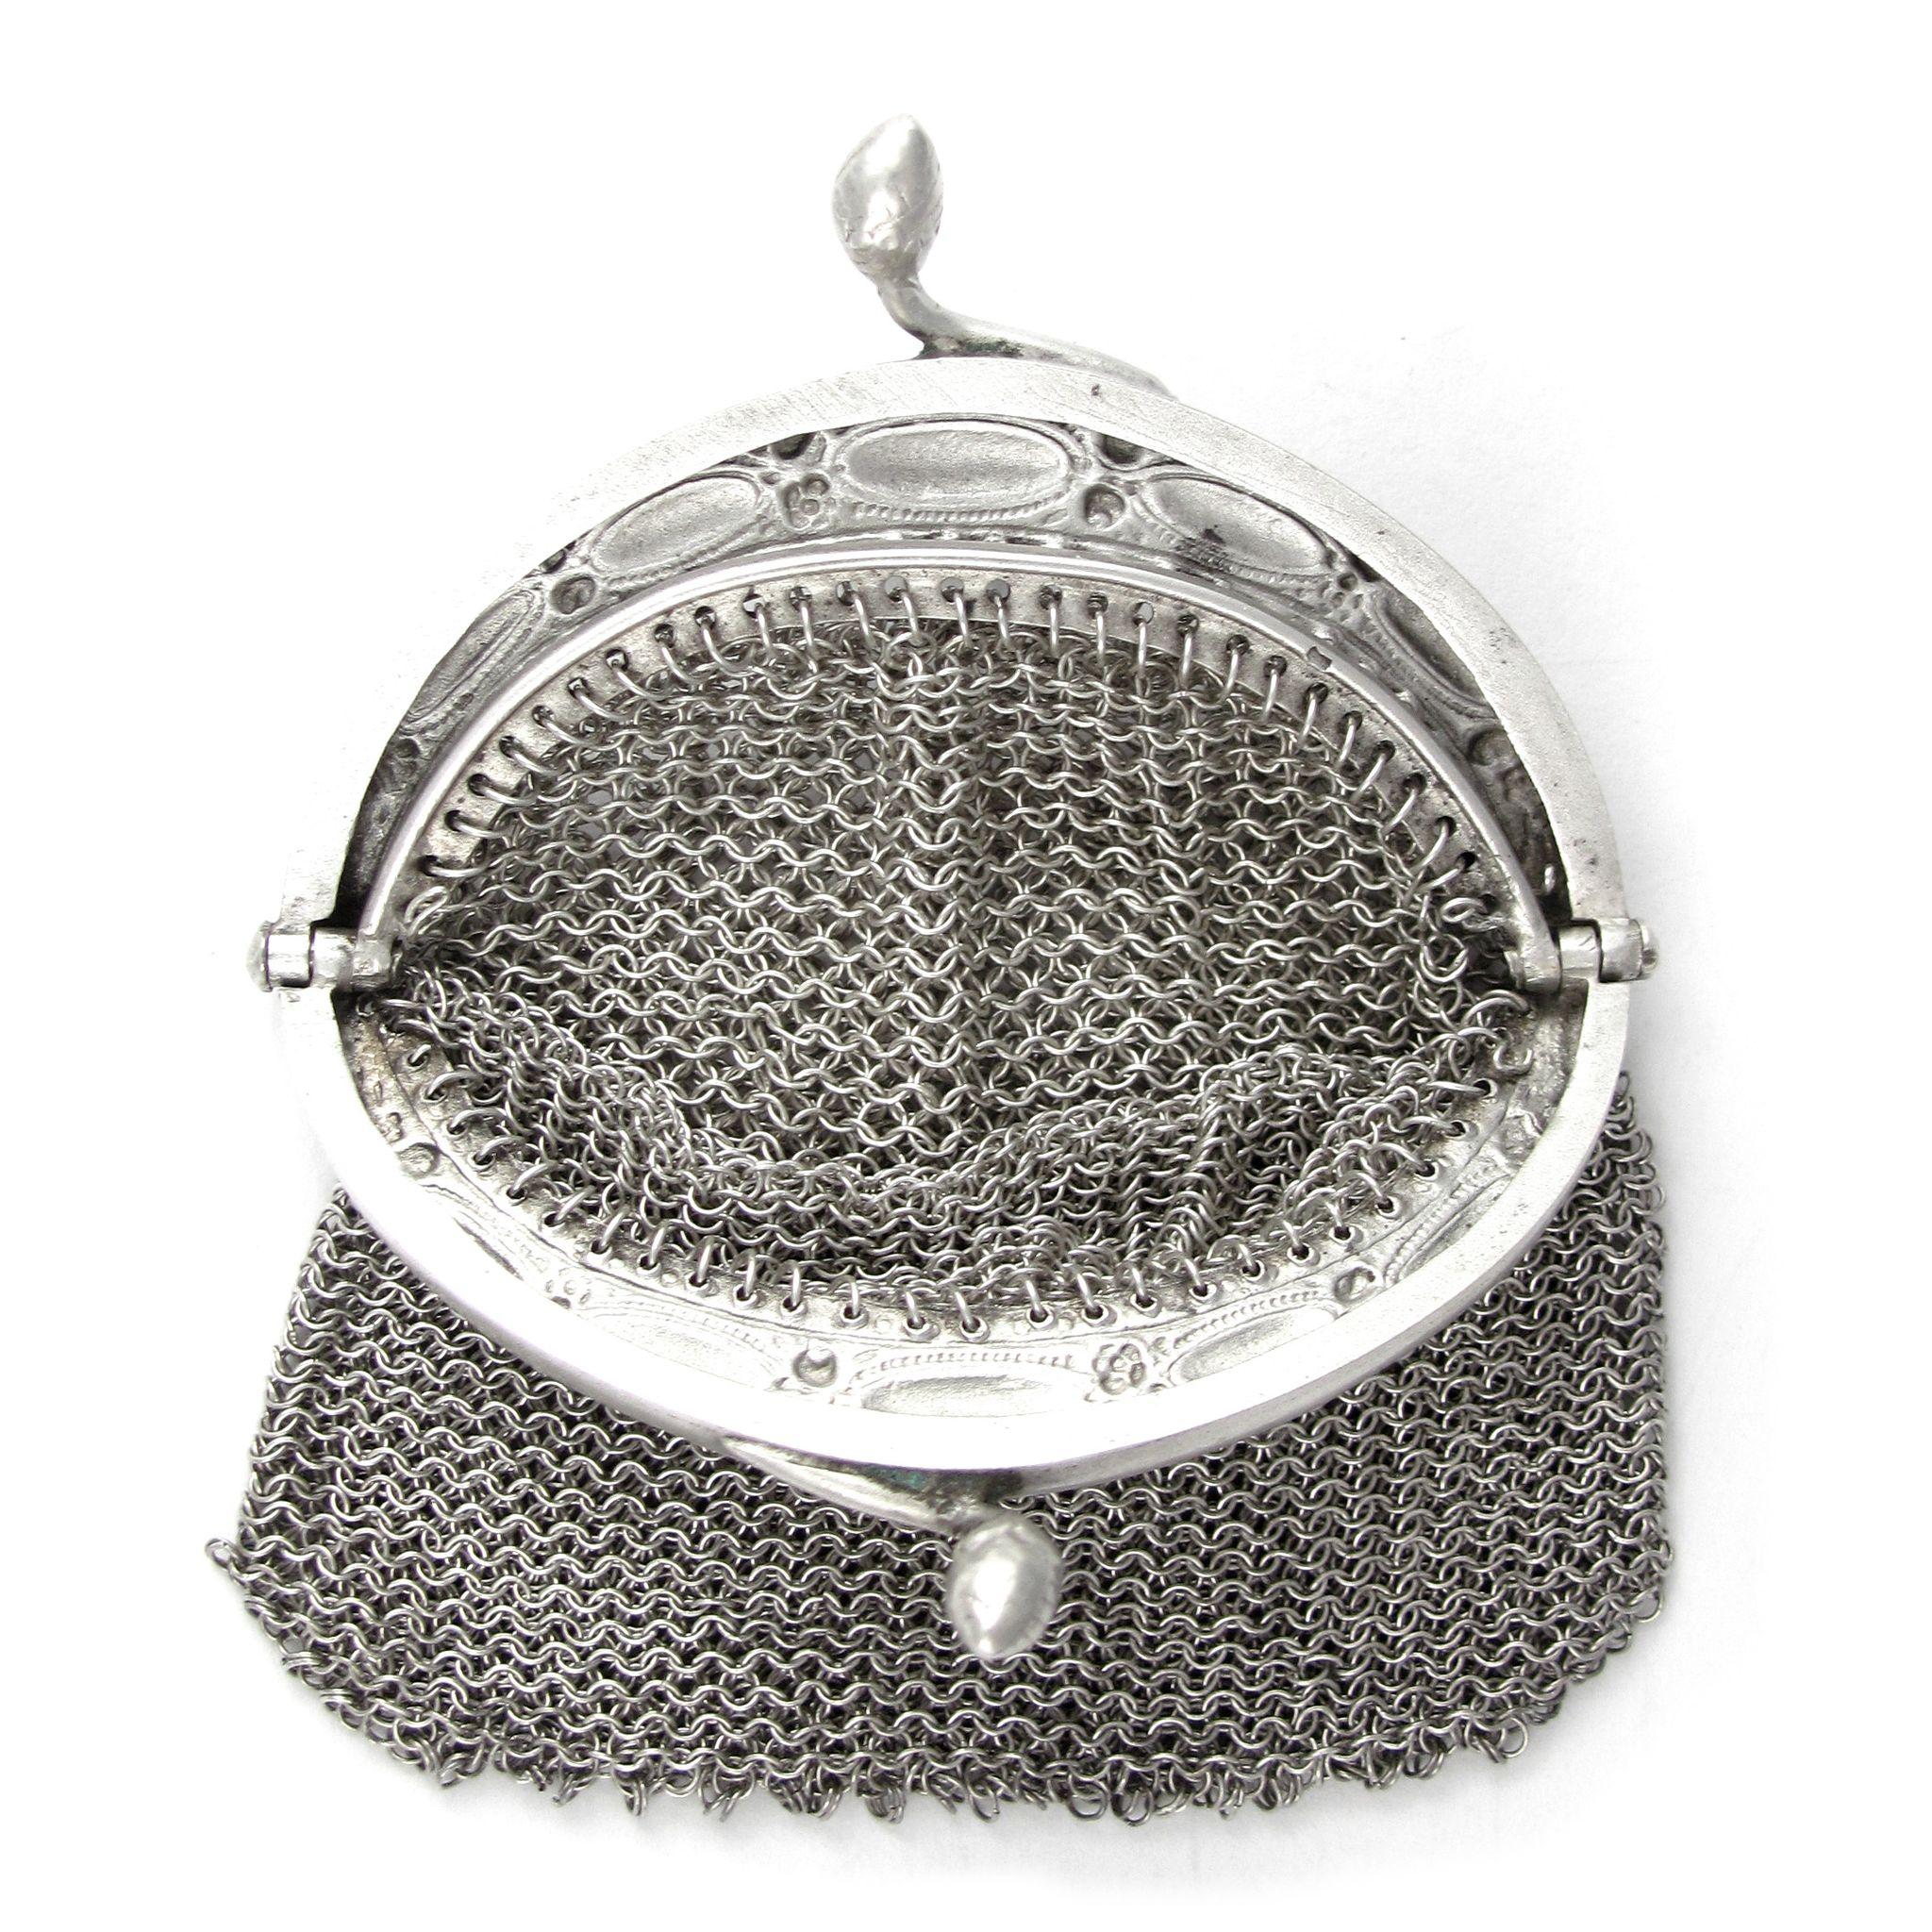 Antique French .800 Silver Chain Mail Mesh Chatelaine Purse | eBay